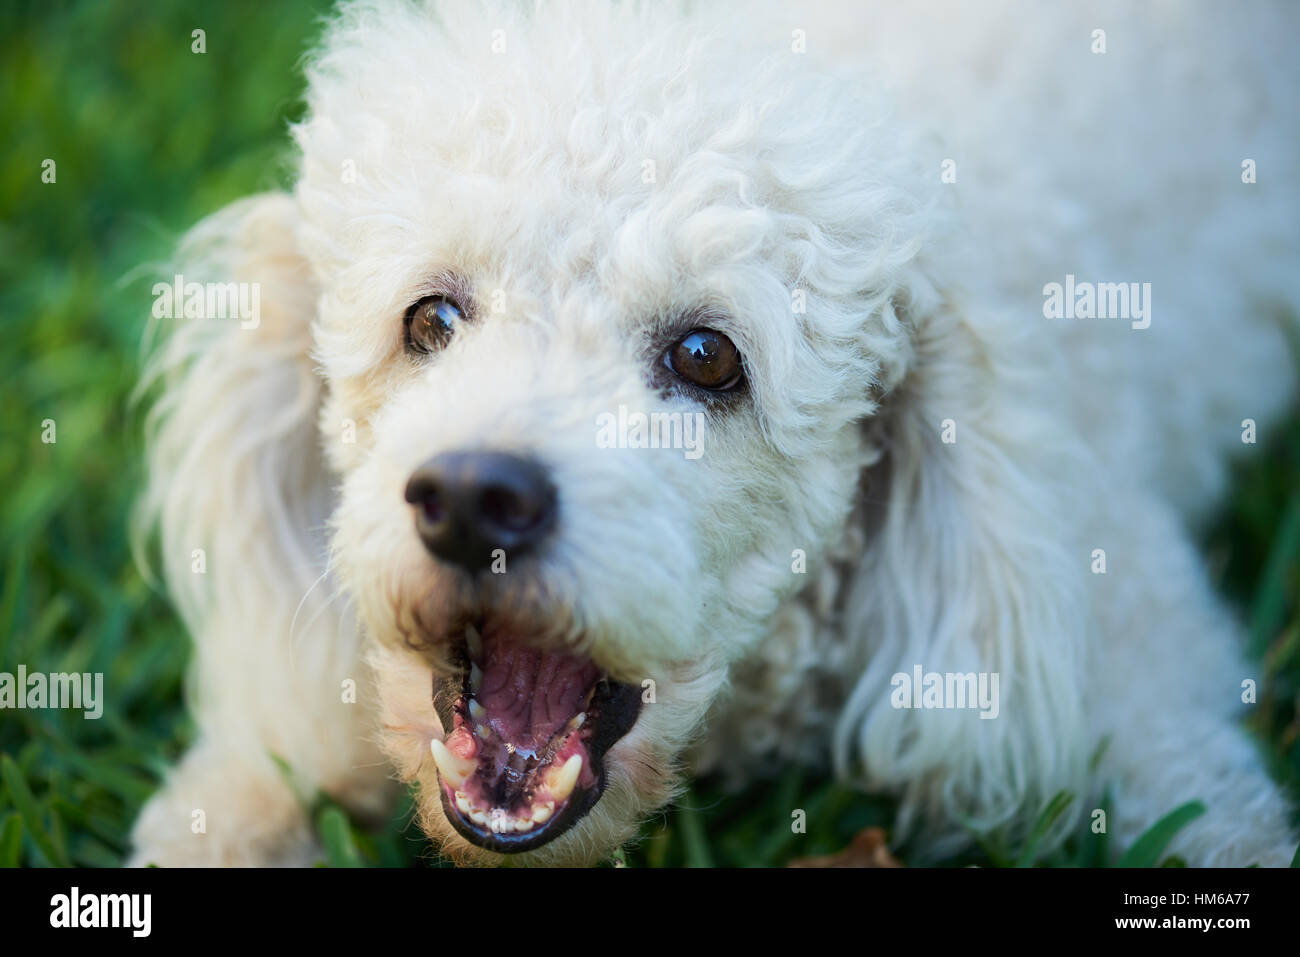 french poodle dog barking and laying on the grass Stock Photo